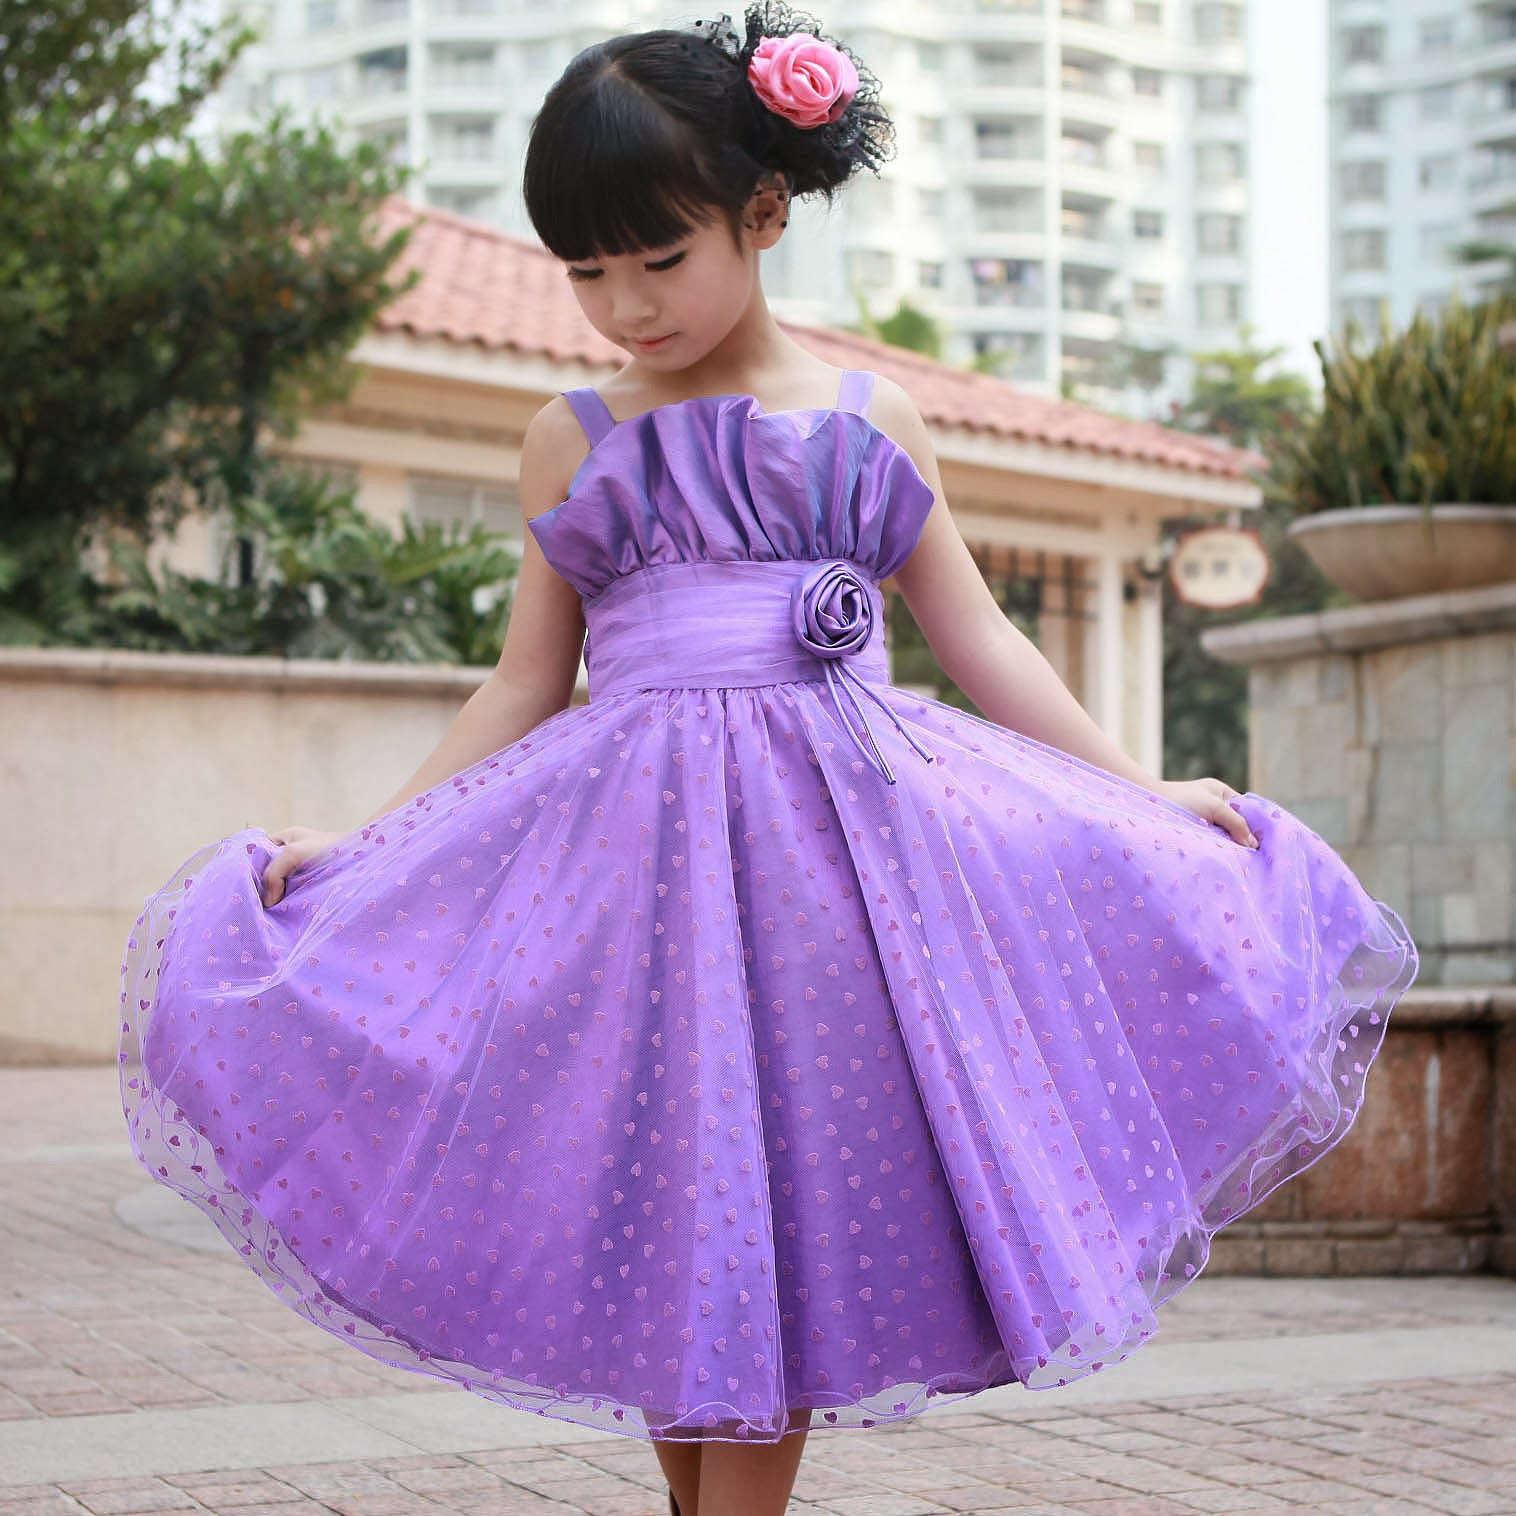 Kids Party Dresses
 New Fashion Styles Kids Eid Dress Girls Collection 2013